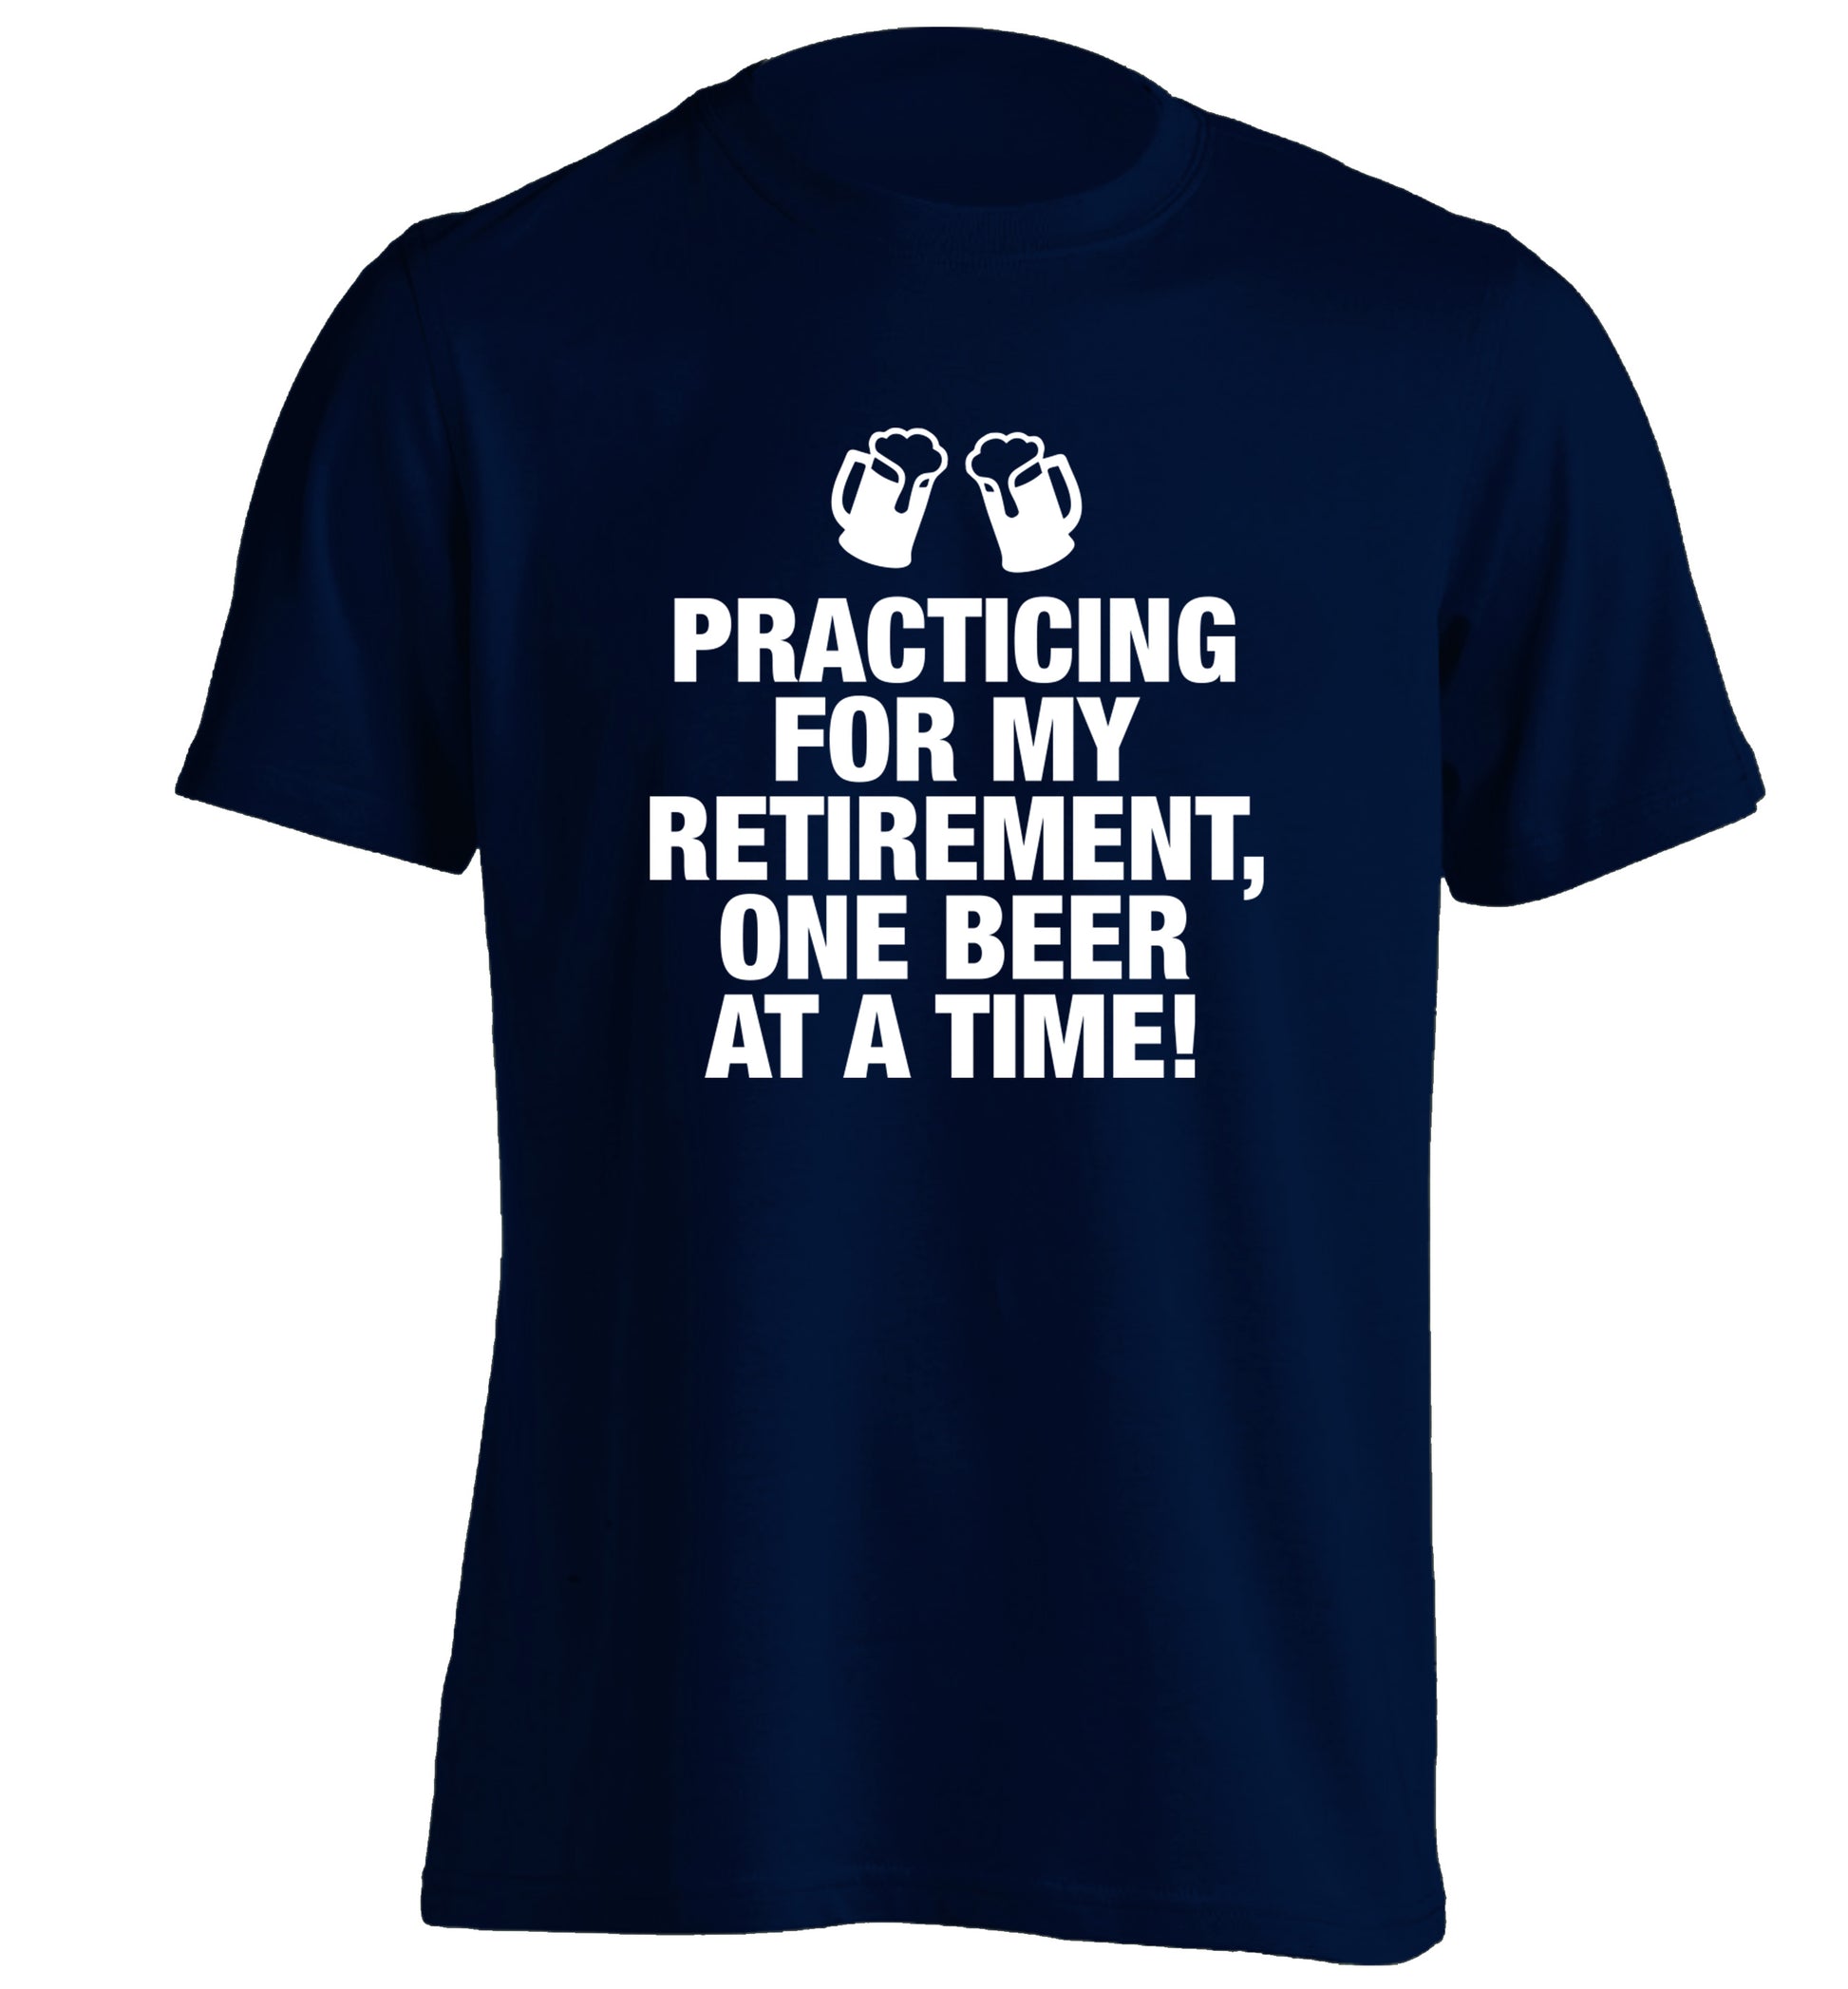 Practicing my retirement one beer at a time adults unisex navy Tshirt 2XL